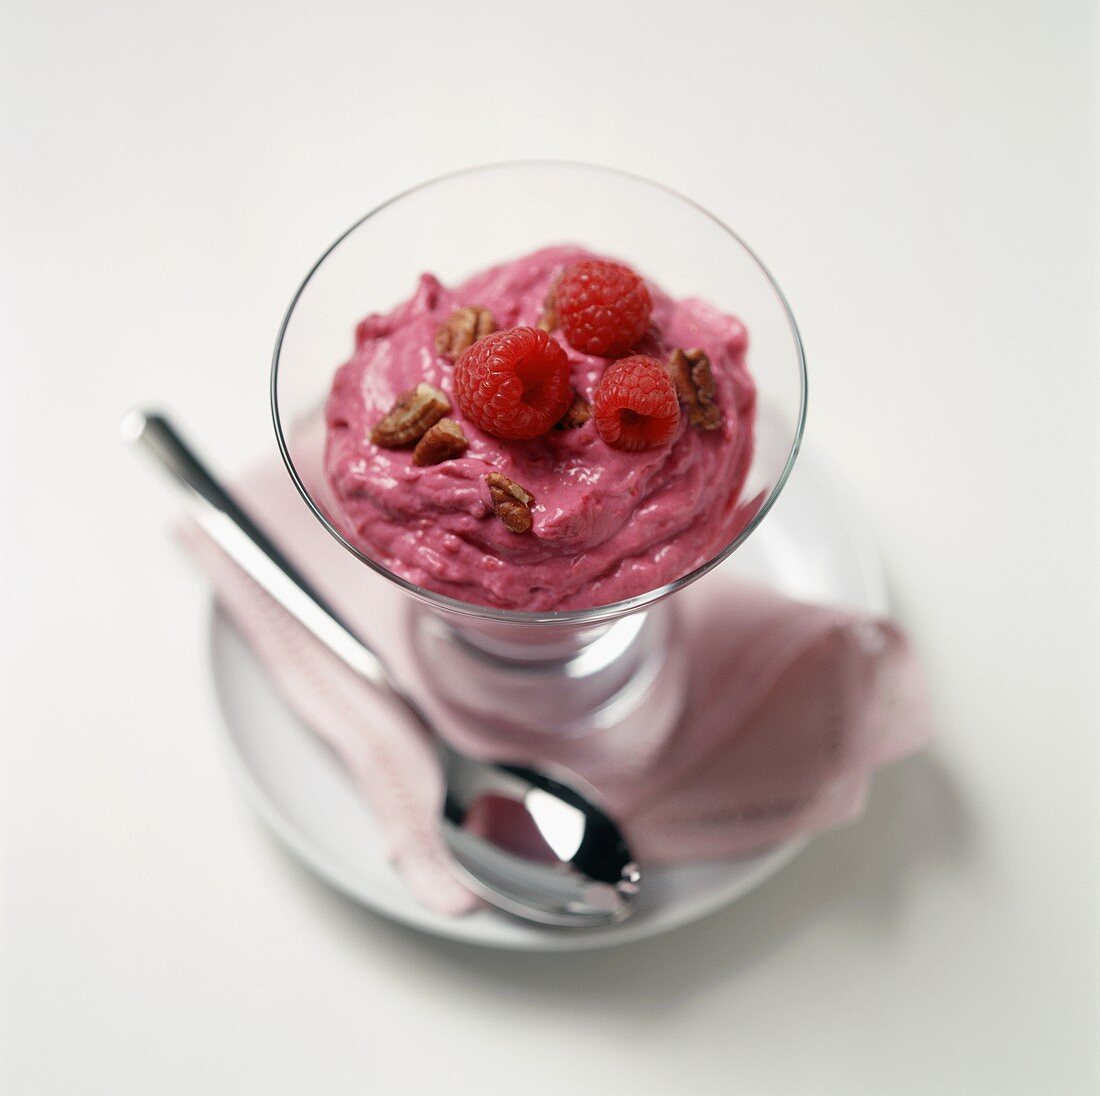 Raspberry Pudding with Walnuts in a Dessert Glass